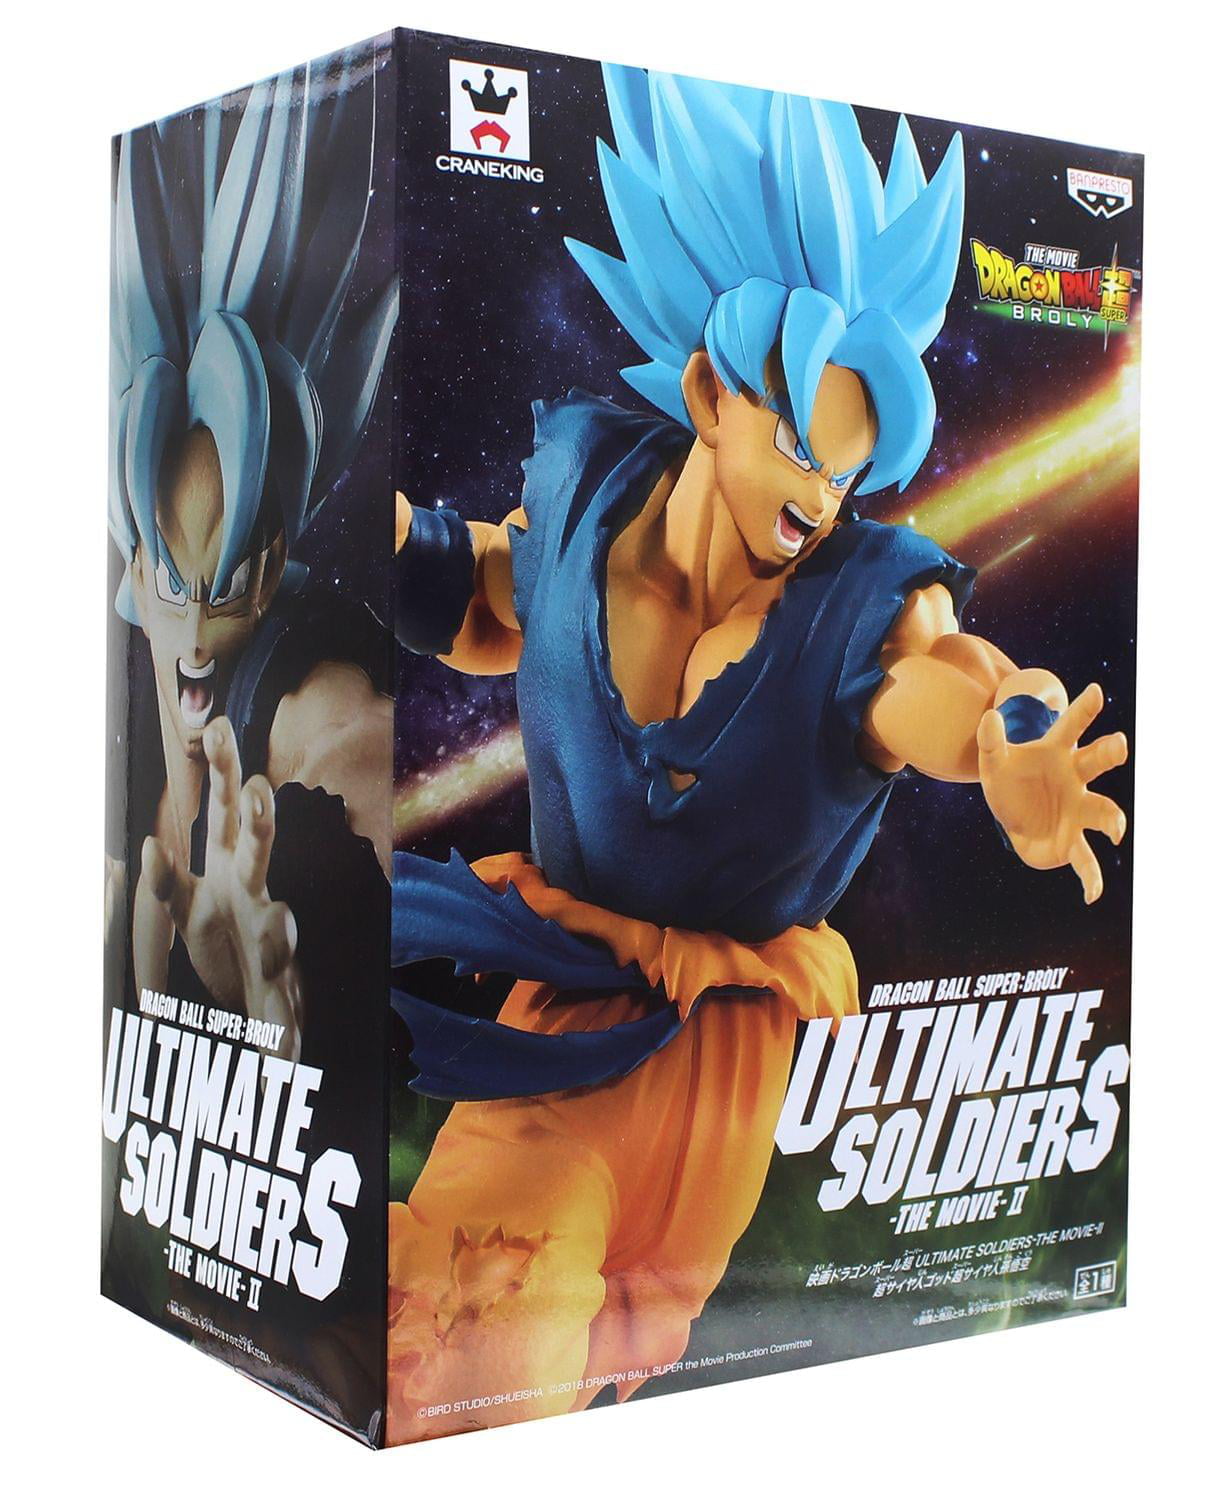 Dragon Ball Super Broly Ultimate Soldiers the Movie Vol.1 Broly Banpresto New 